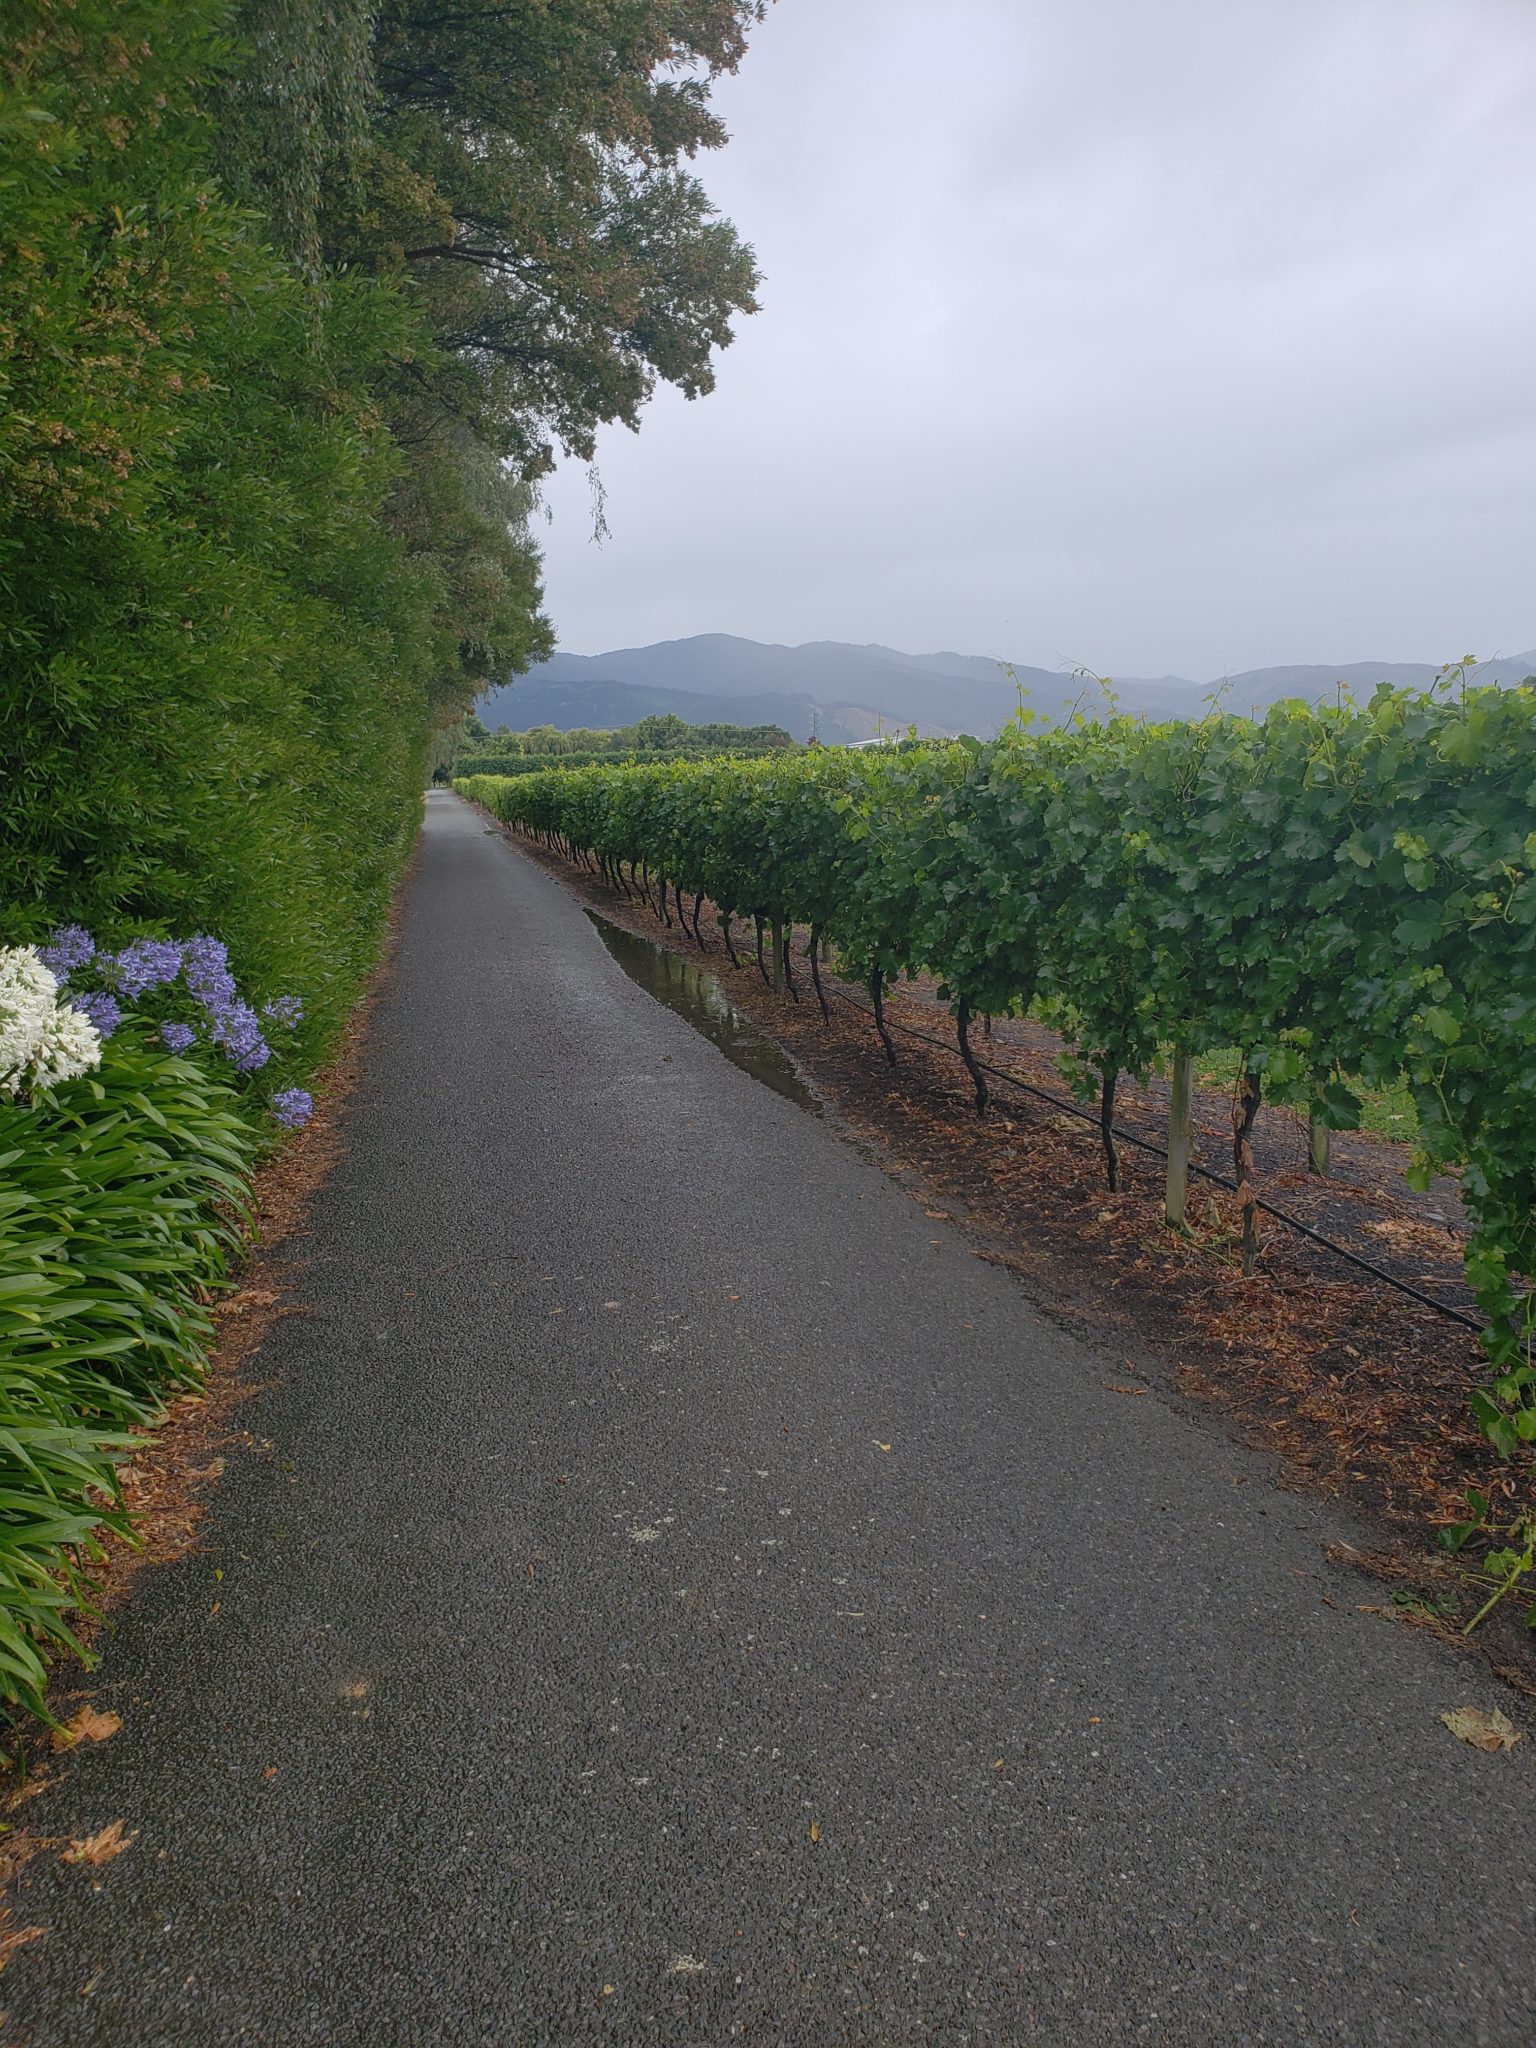 a path with rows of vines and bushes